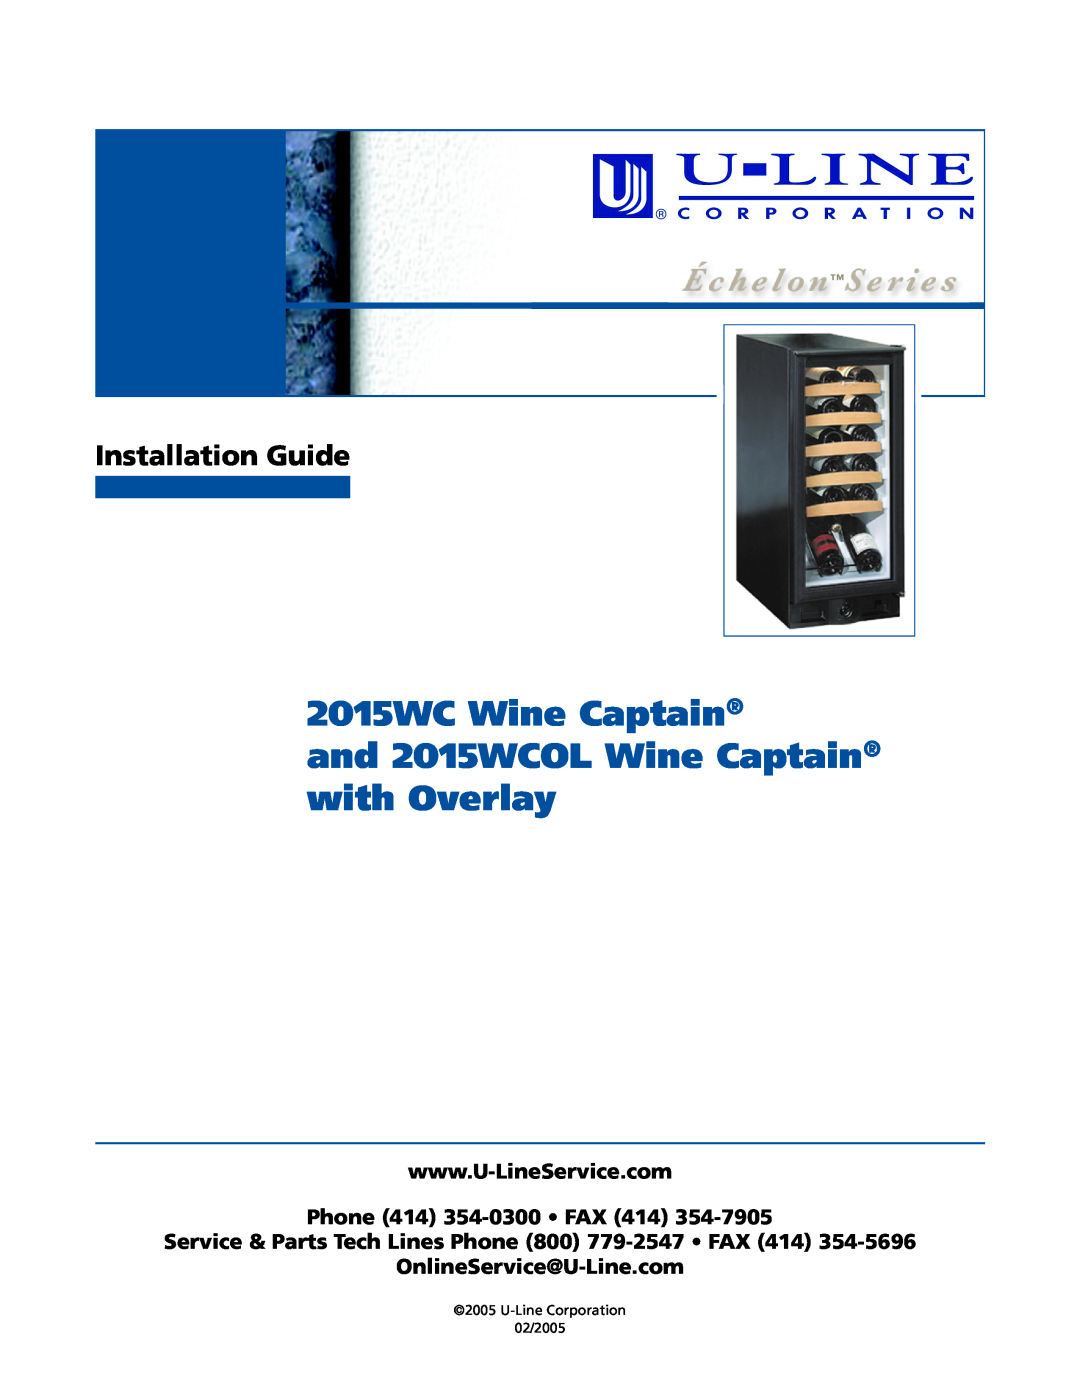 U-Line manual 2015WC Wine Captain, and 2015WCOL Wine Captain with Overlay, Installation Guide 